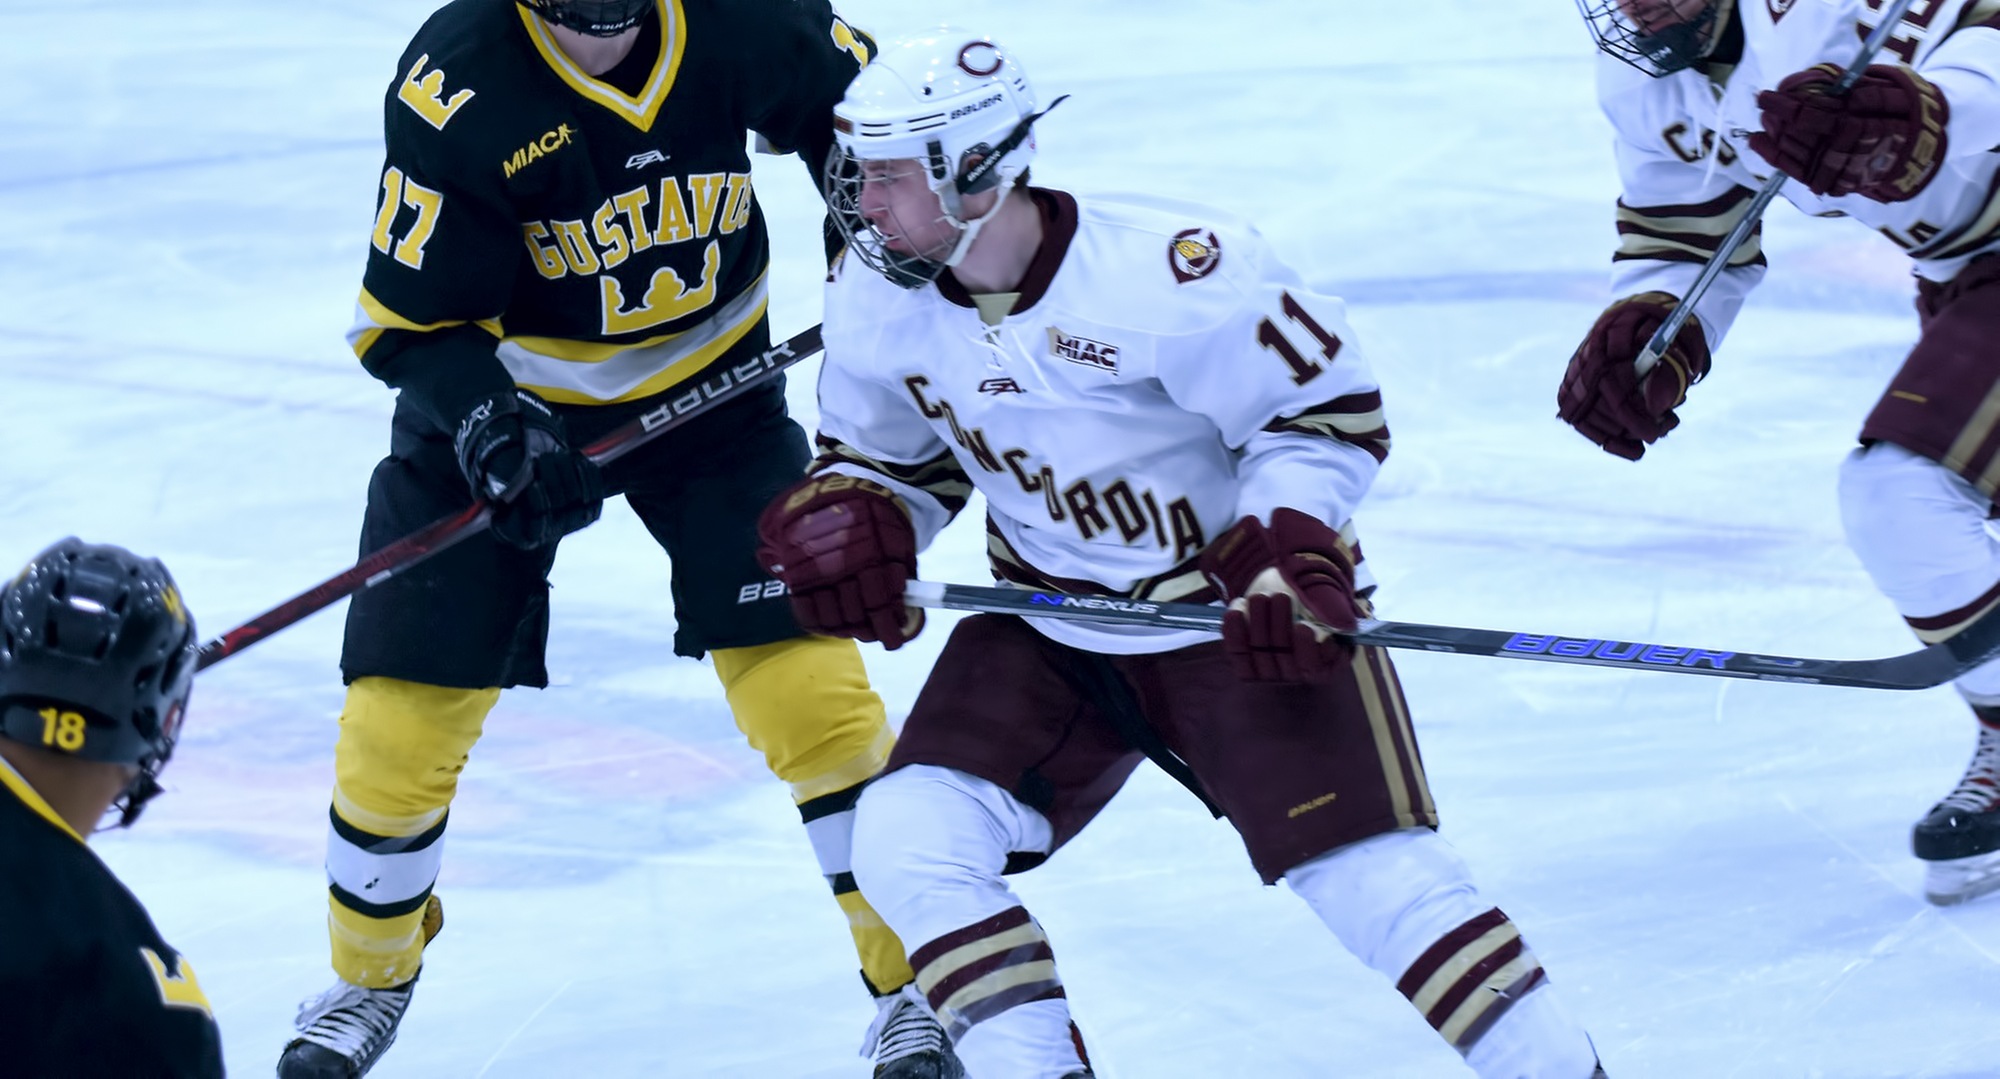 Sophomore Jacen Bracko scored the Cobbers' second goal in the series finale at Gustavus. Bracko now has 10 points on the year and is one of four CC players with a double-digit point total.